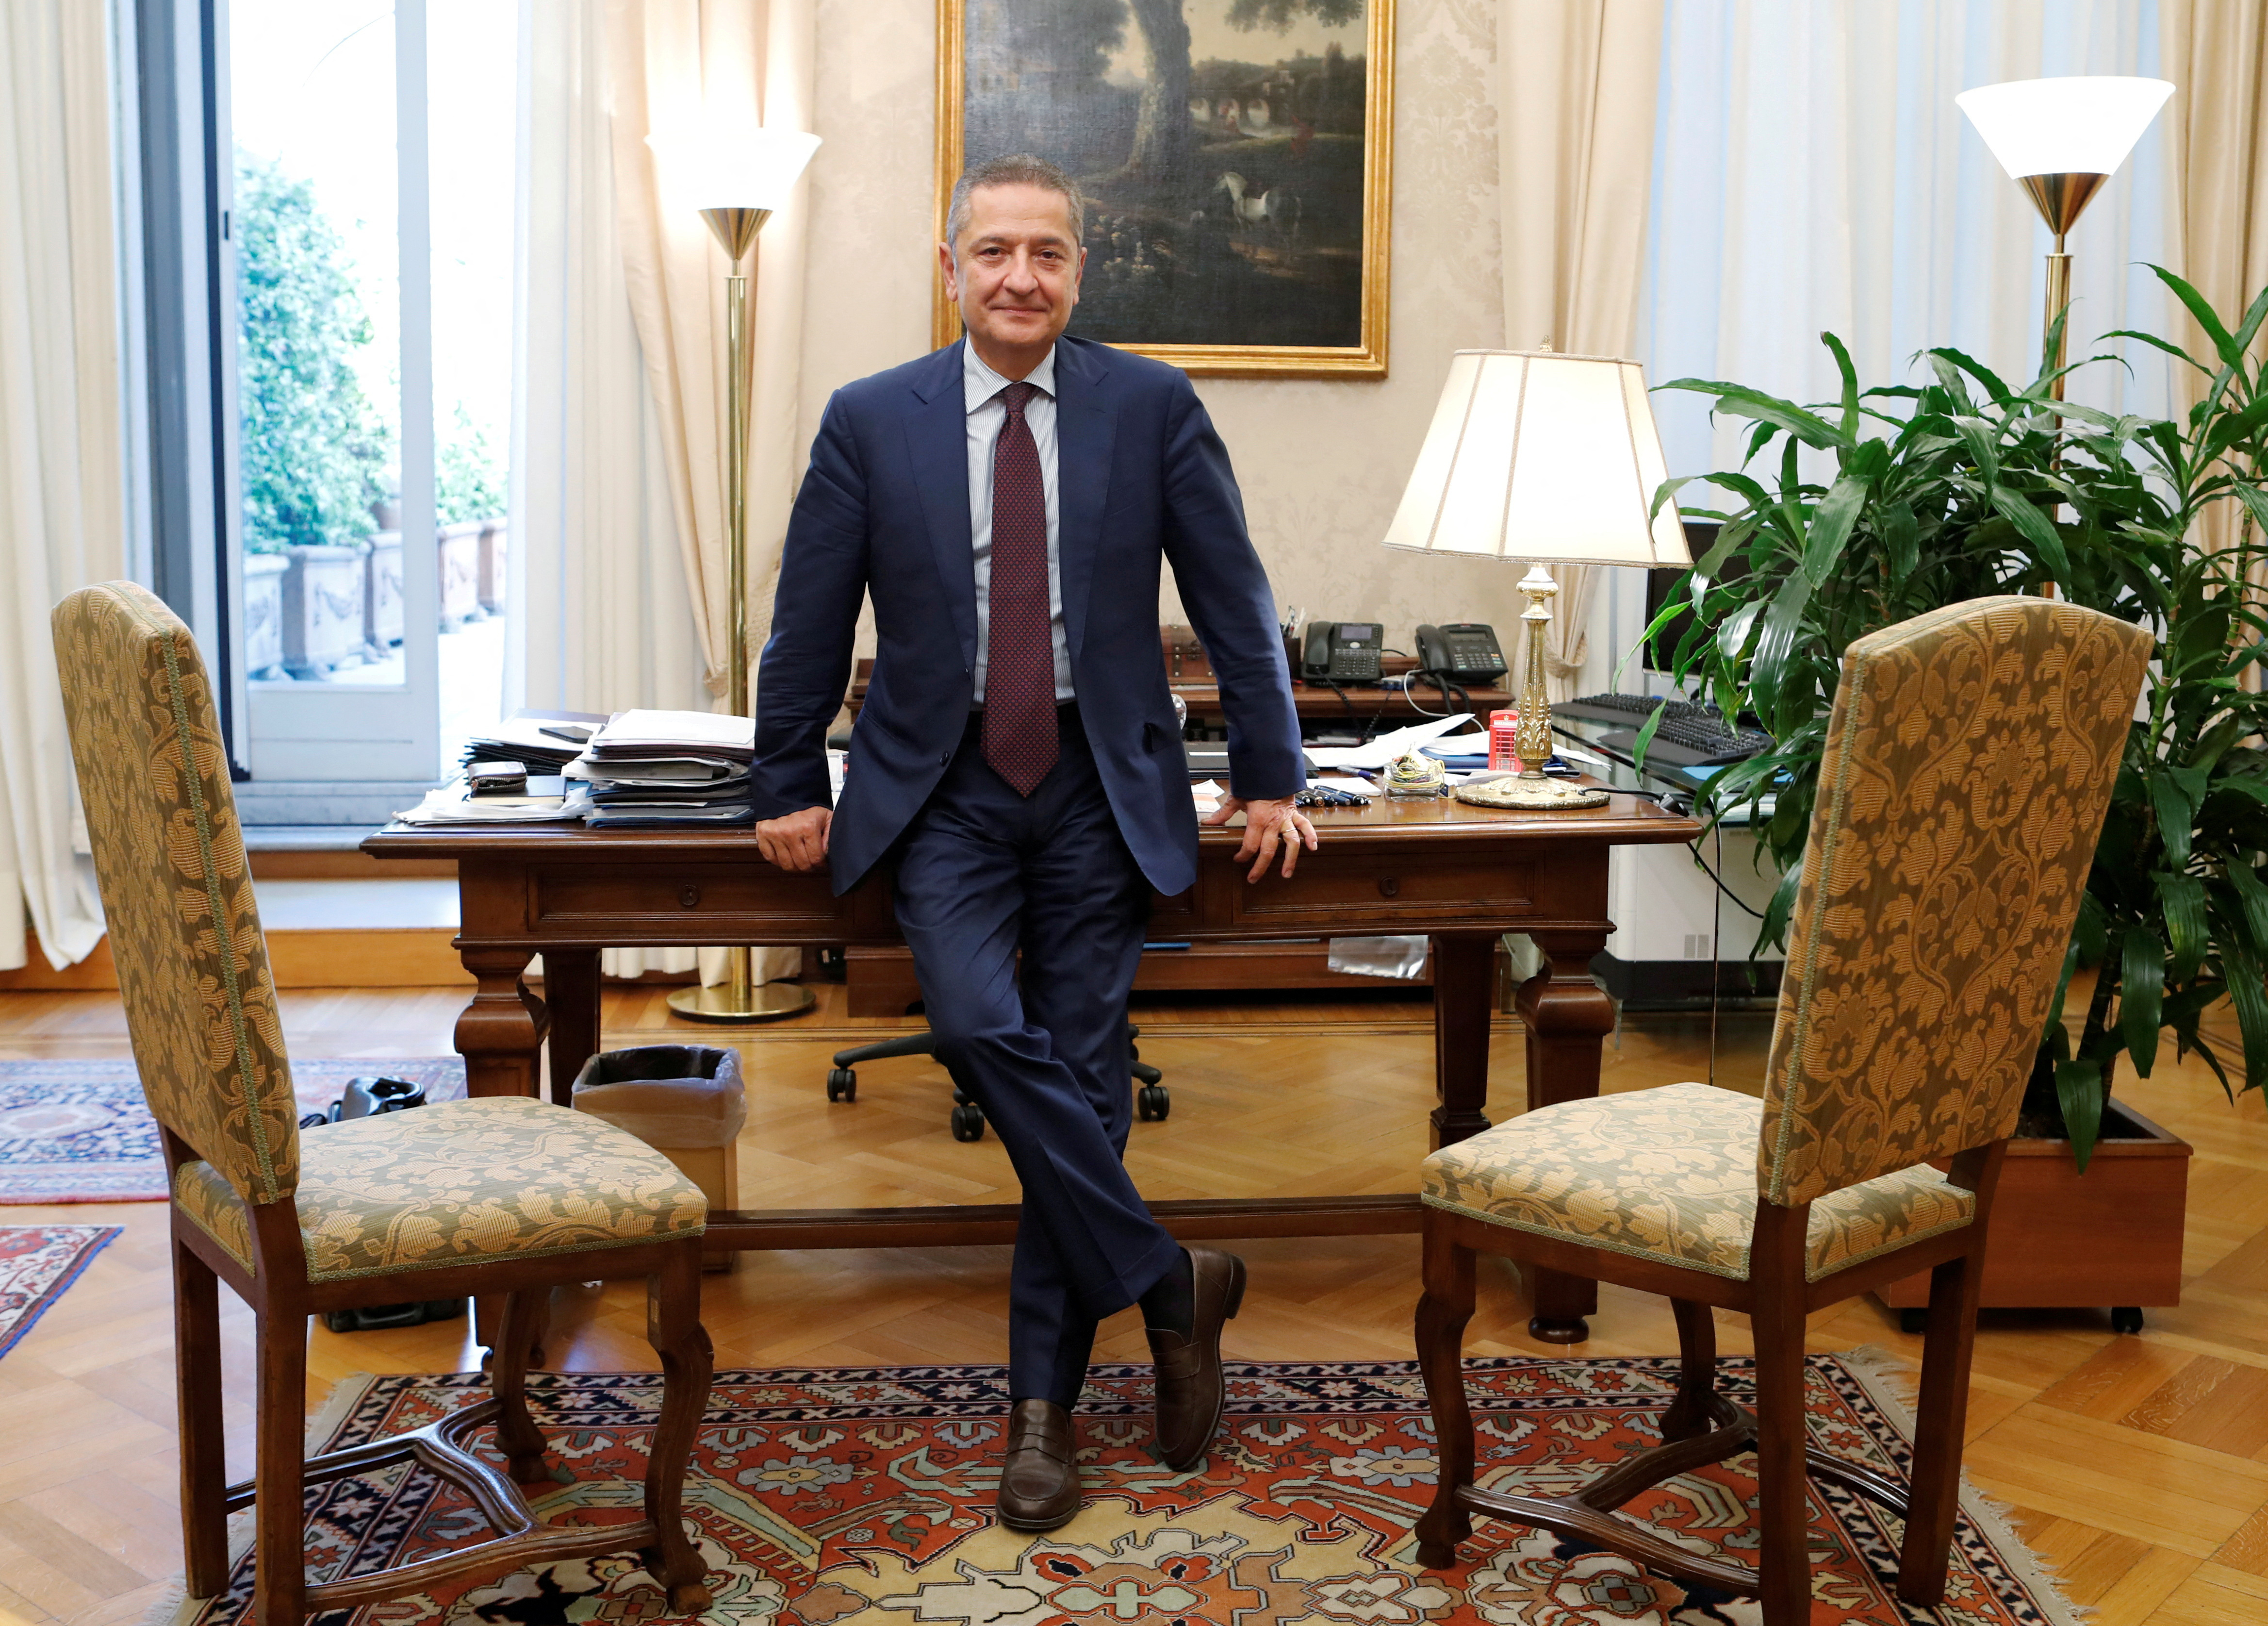 Fabio Panetta is seen in his office ahead of his appointment to the European Central Bank's executive committee